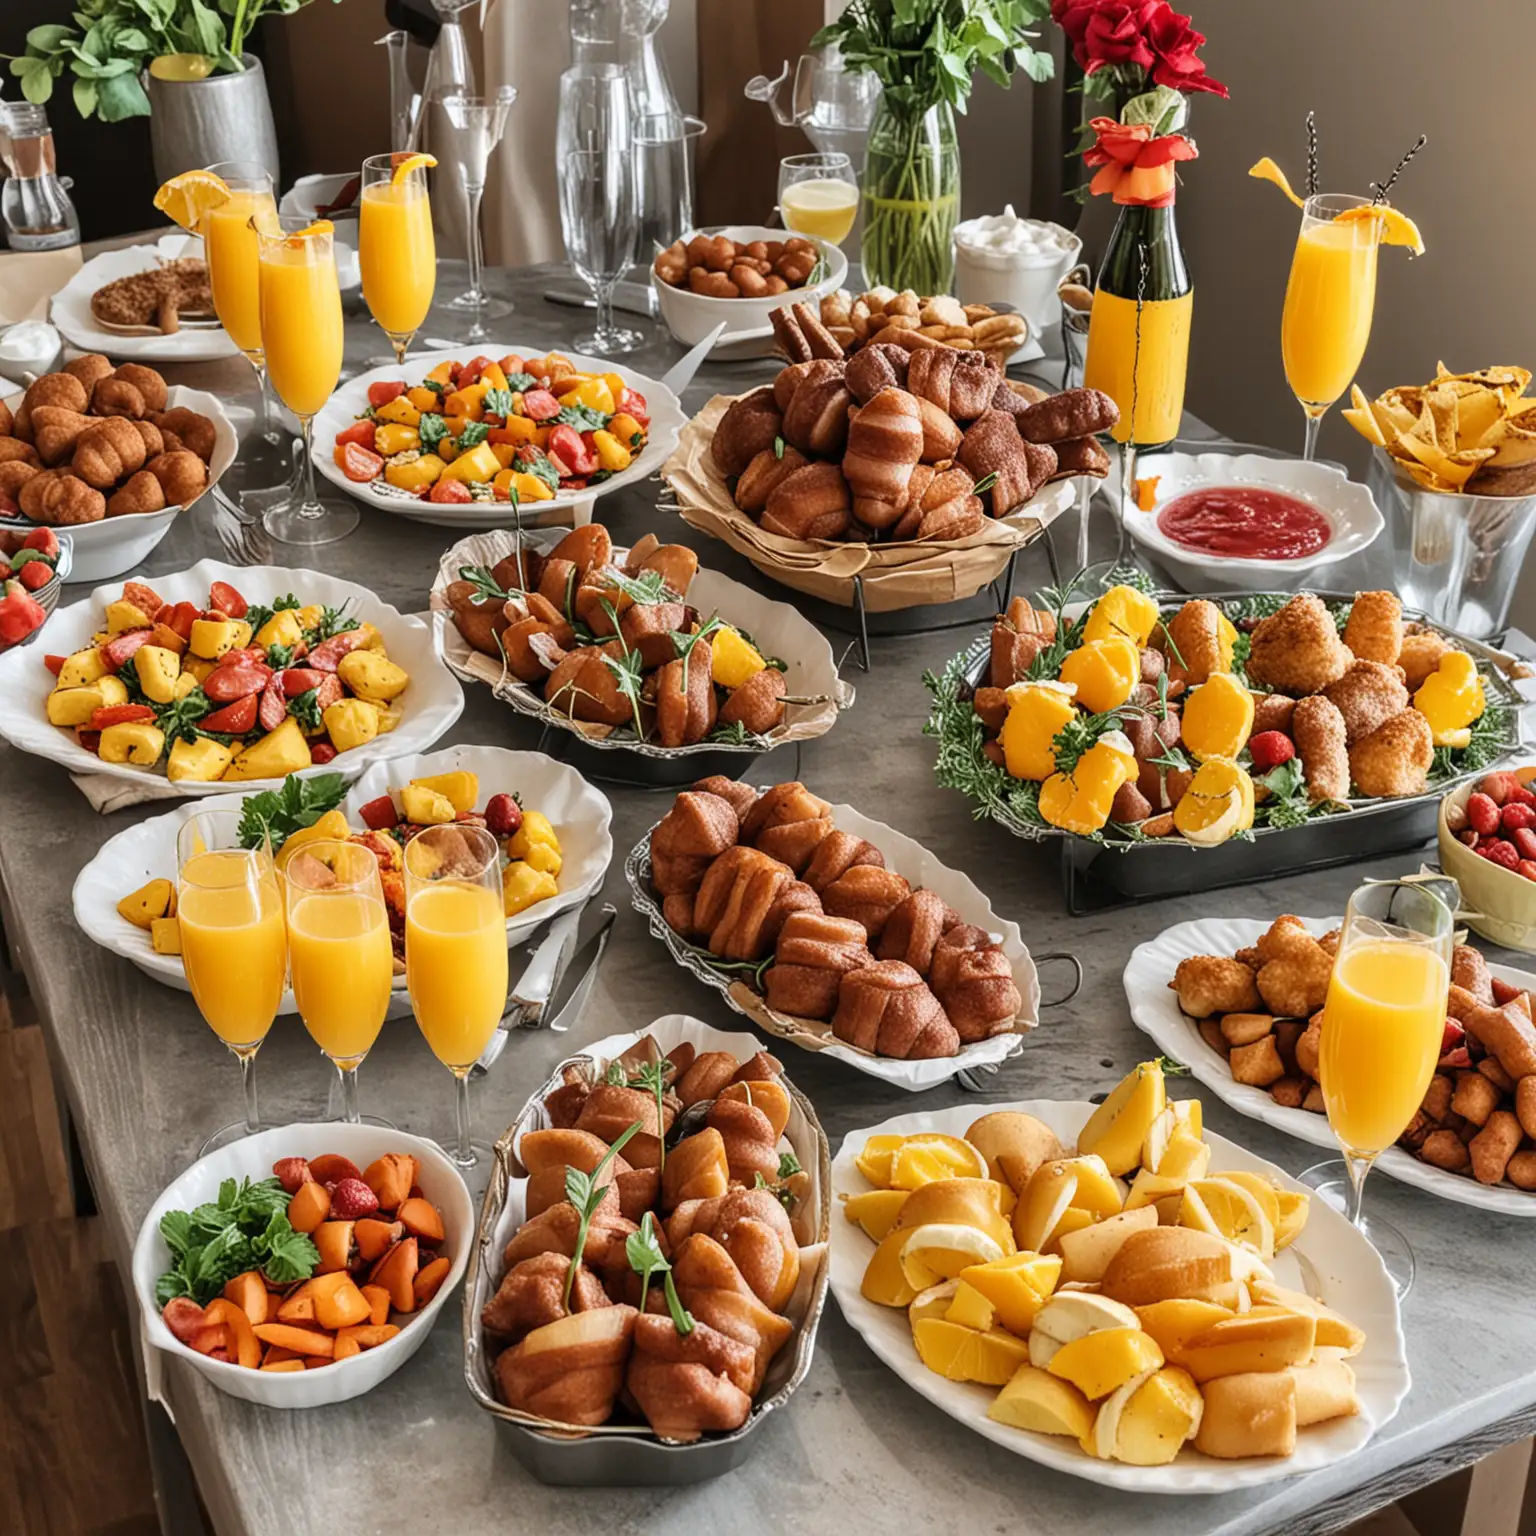 Weekend Brunch Event with Mimosas and Buffet Delights